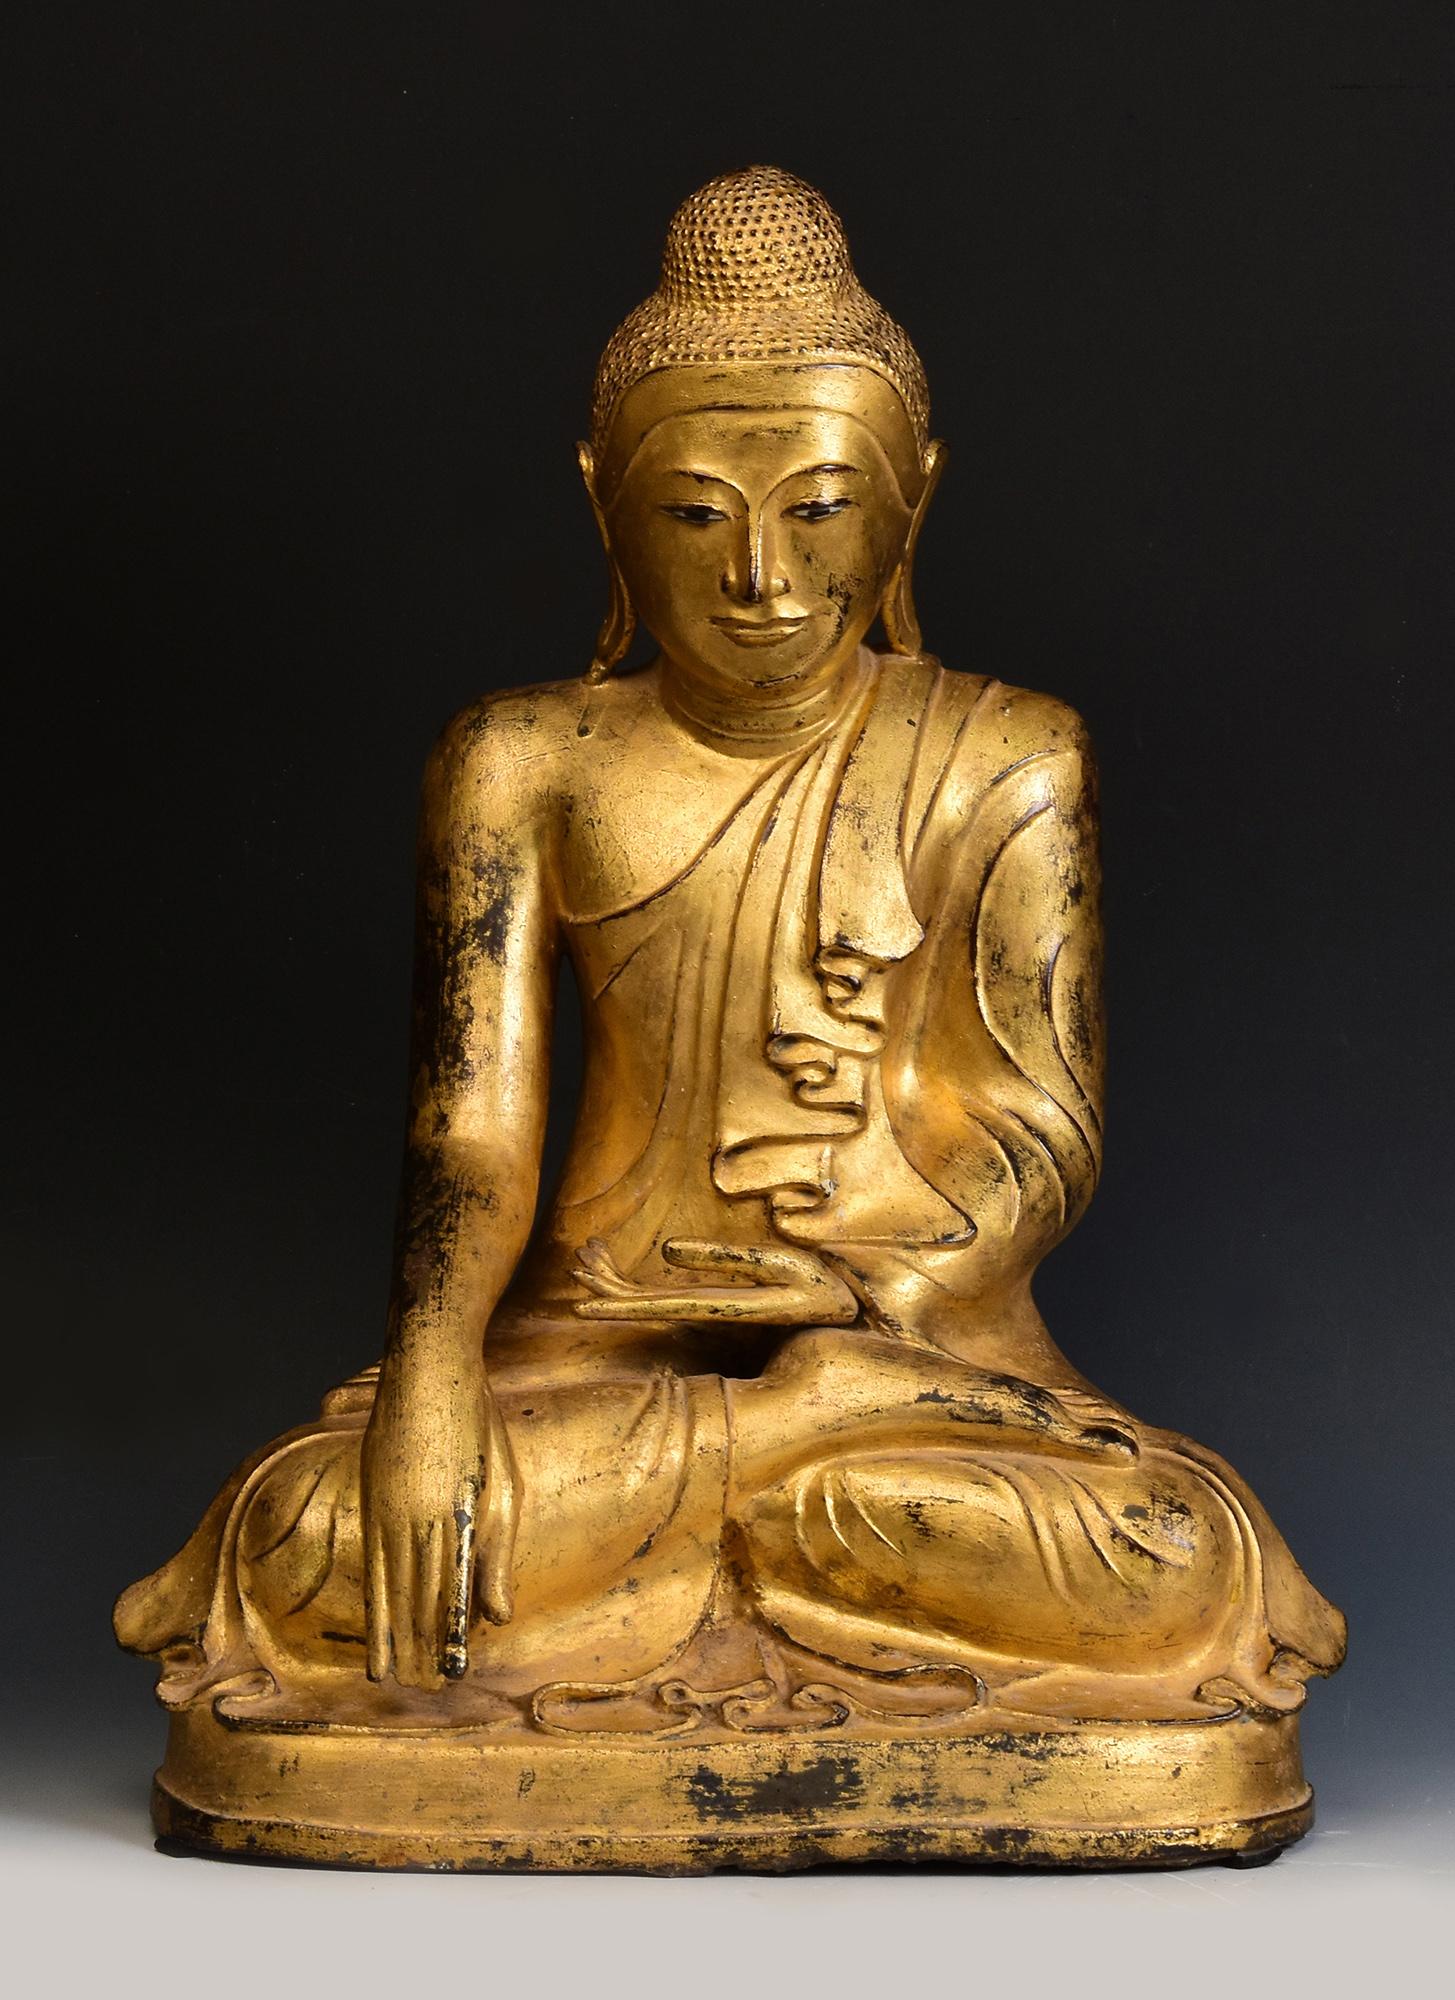 Burmese bronze Buddha sitting in Mara Vijaya (calling the earth to witness) posture on a base, with gilded gold.

Age: Burma, Mandalay Period, 19th Century
Size: Height 55 C.M. / Width 41 C.M. / Depth 28 C.M.
Condition: Nice condition overall (some